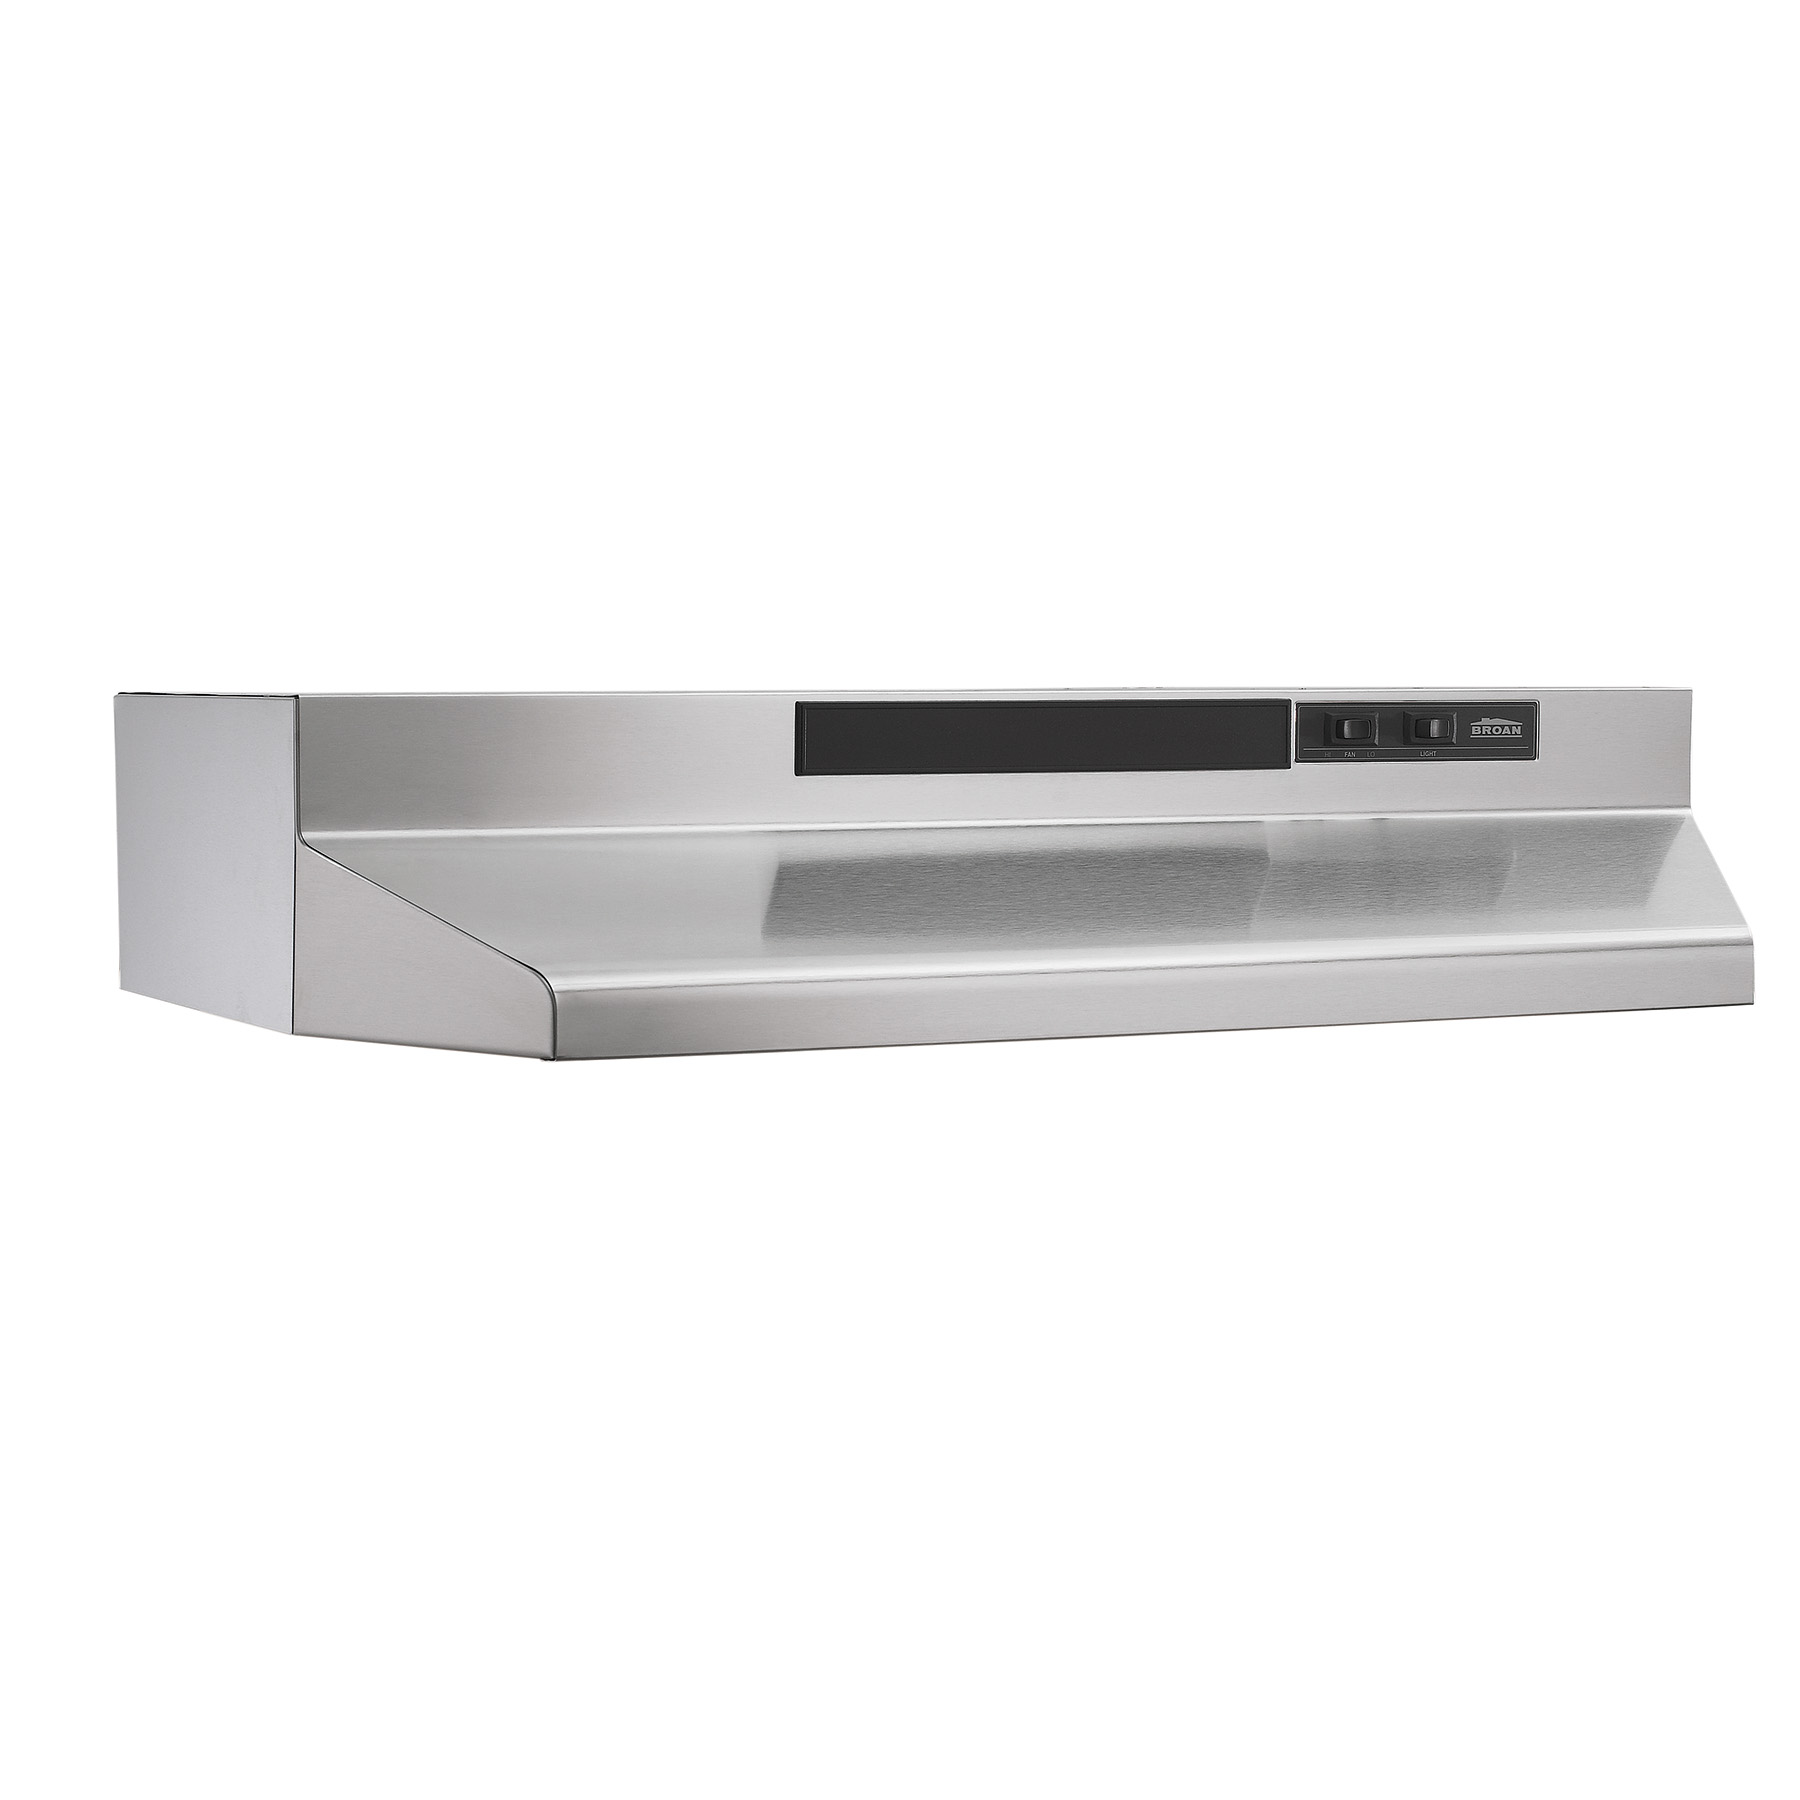 30-Inch Stainle Details about   Broan-NuTone F403004 Two-Speed Four-Way Convertible Range Hood 